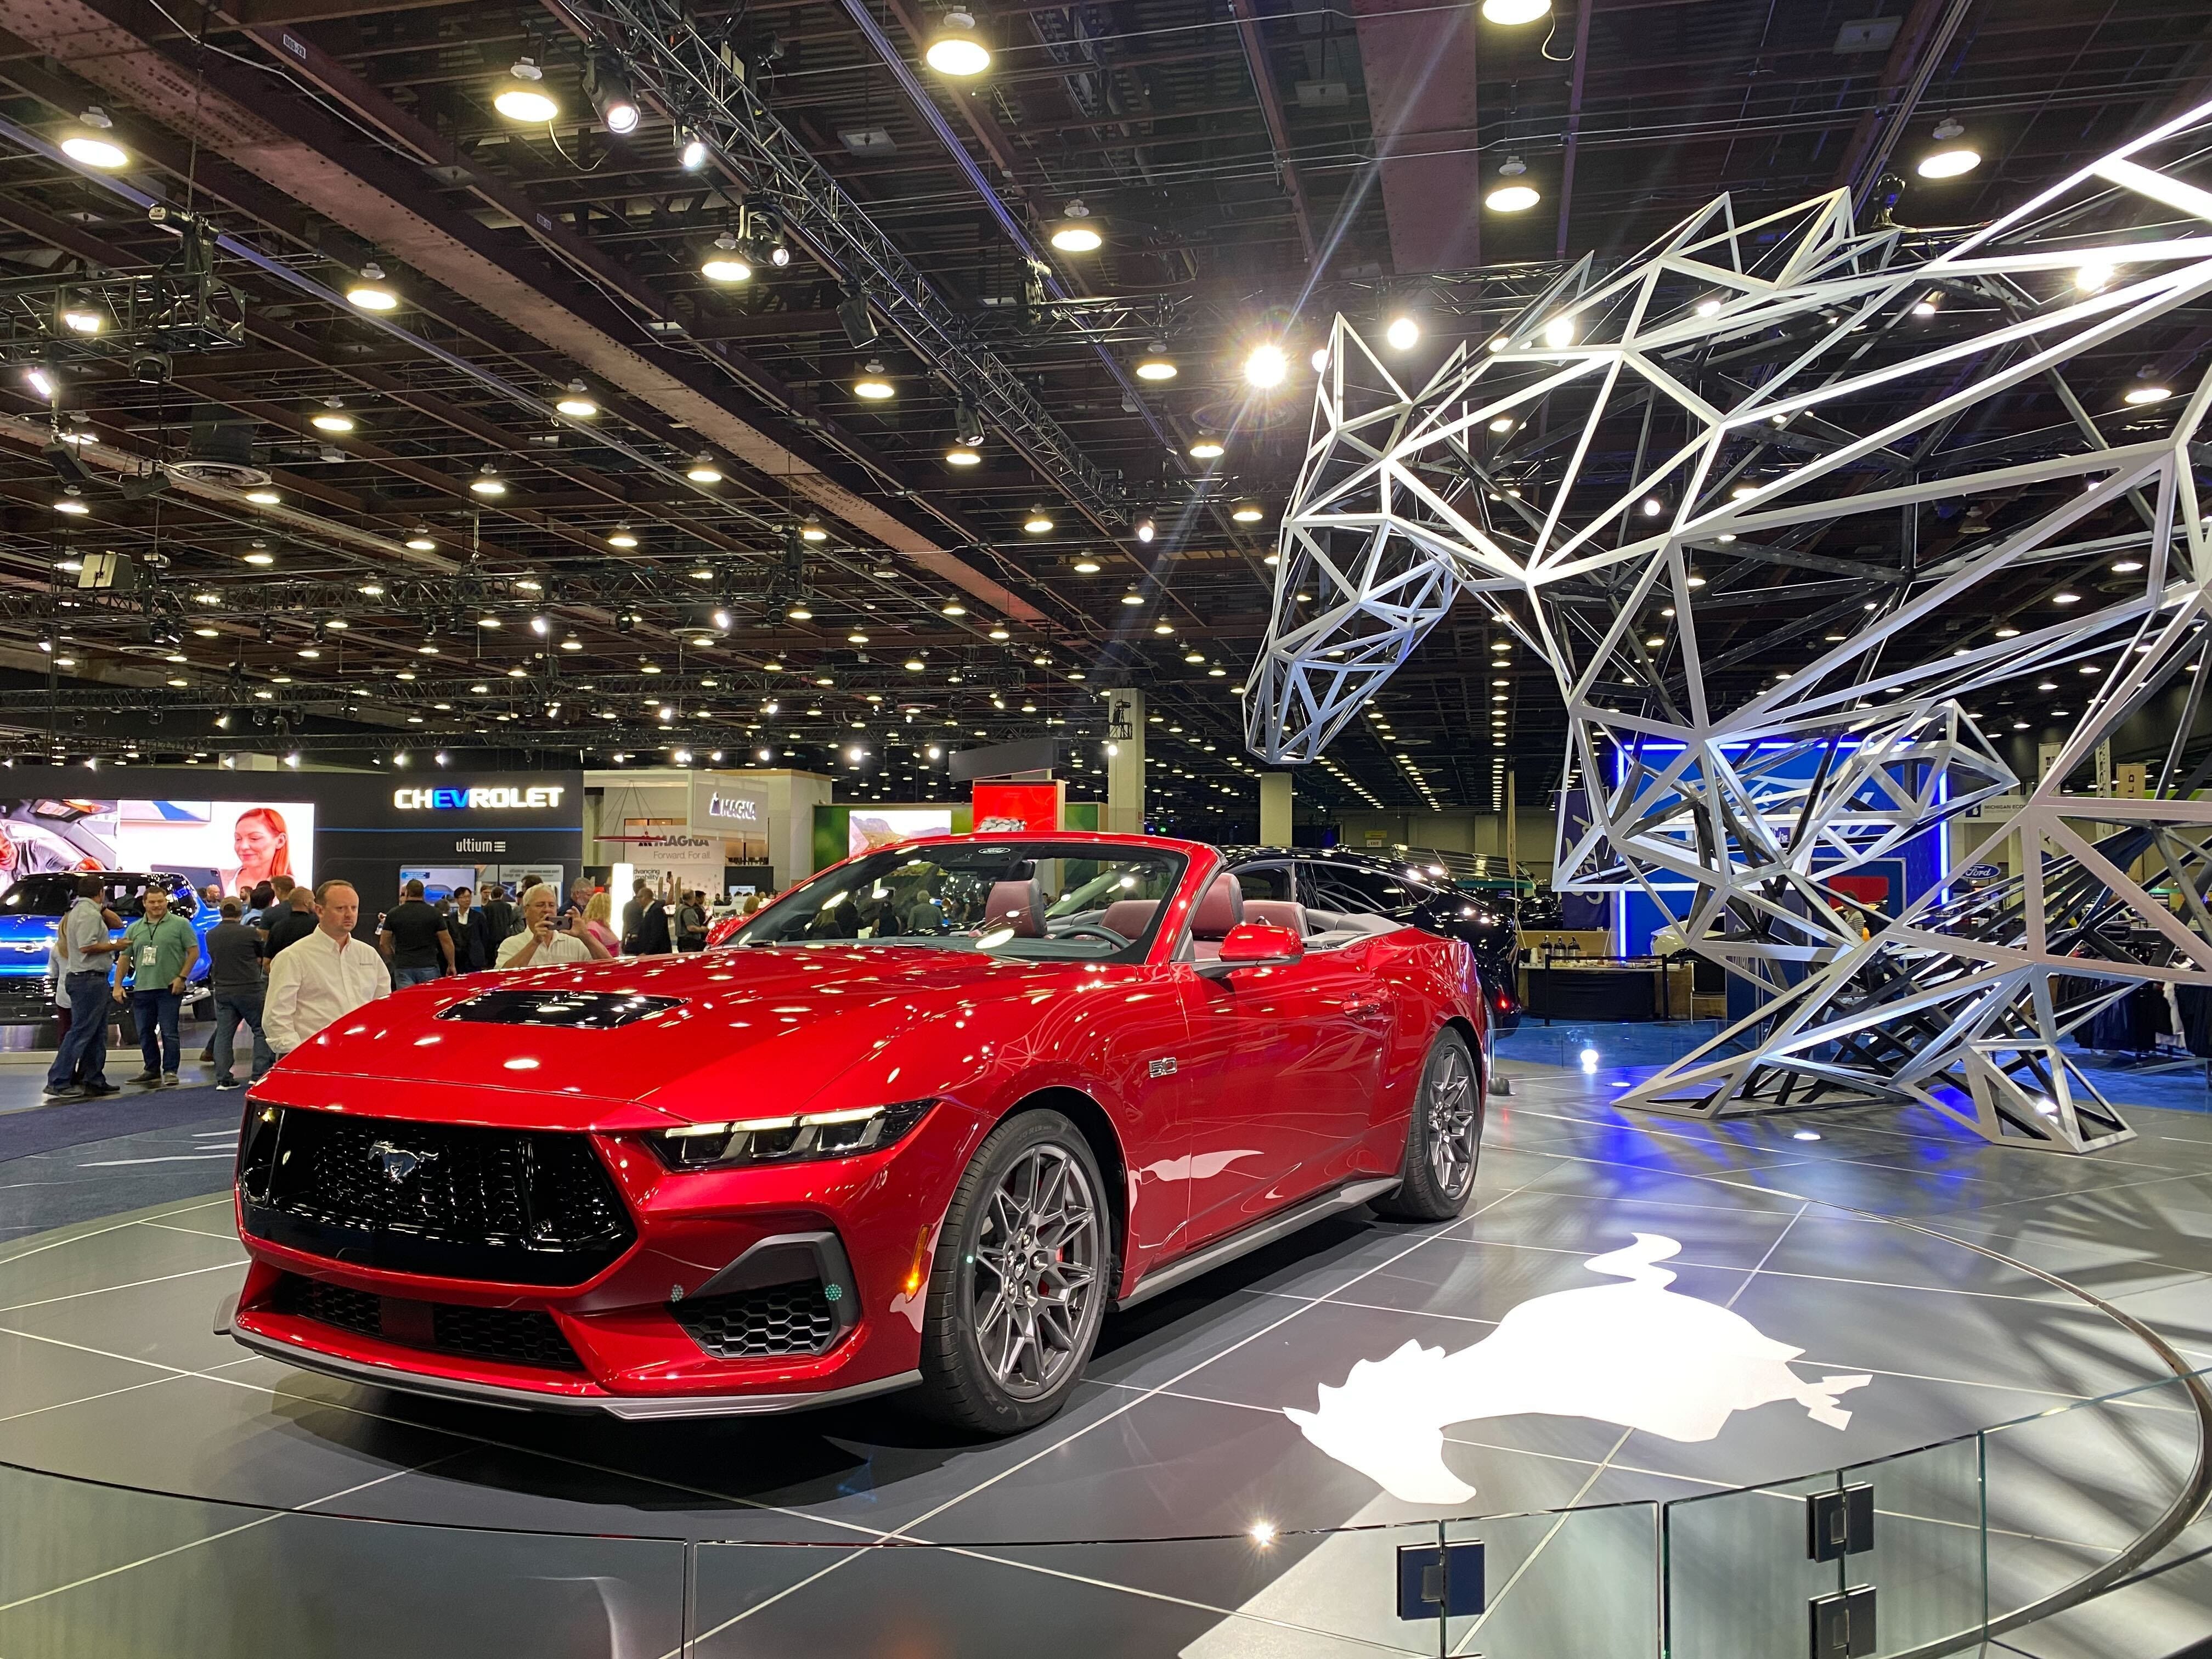 7th-generation Ford Mustang convertible at the 2022 Detroit Auto Show